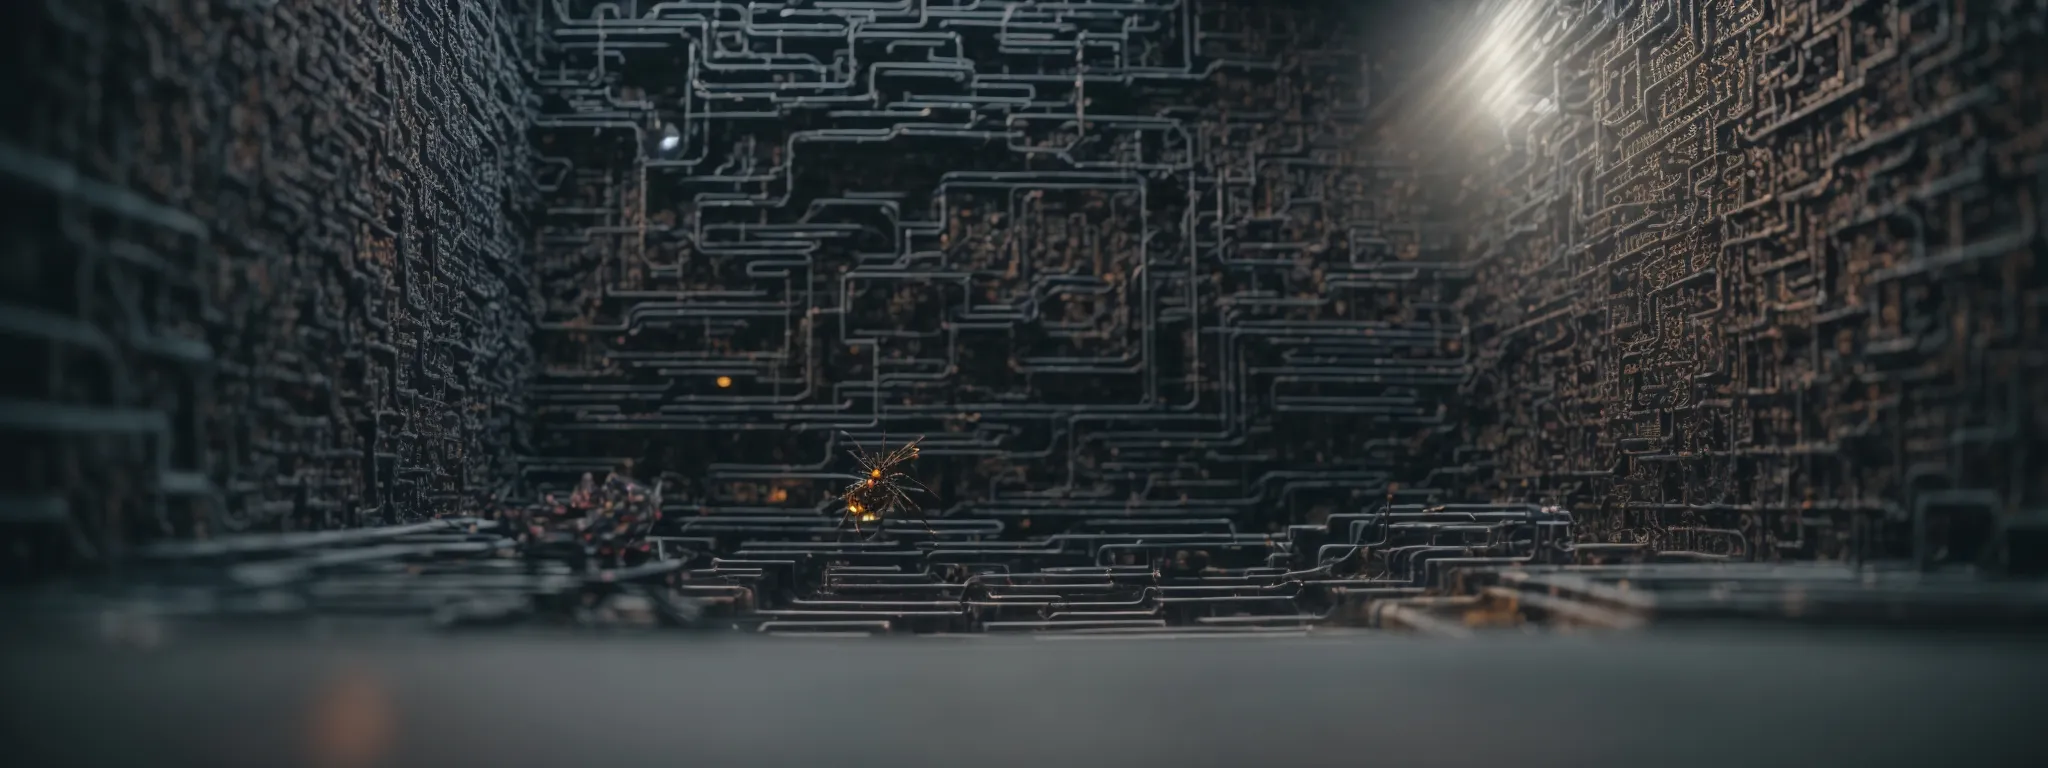 a digital maze with robot spiders navigating through pathways defined by walls of code.